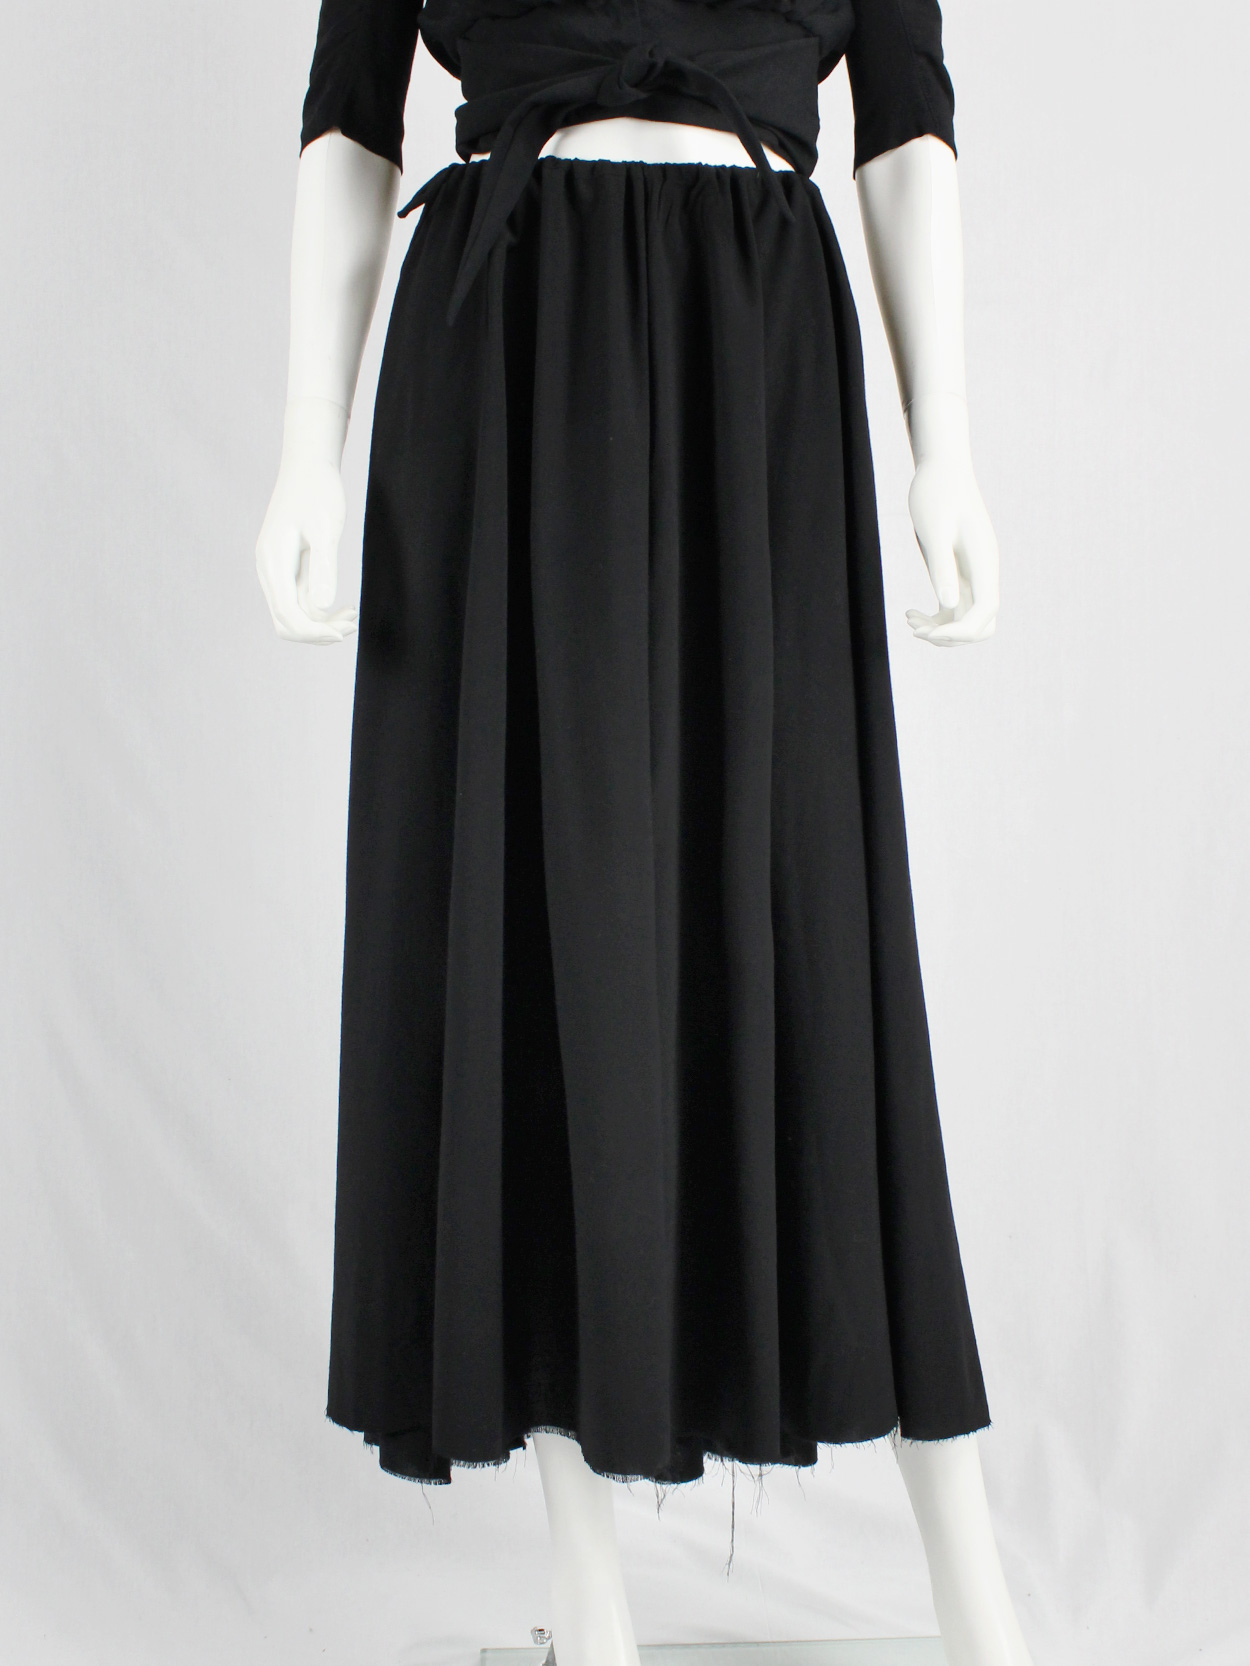 Dries Van Noten black gathered maxi skirt with frayed trim - V A N II T A S